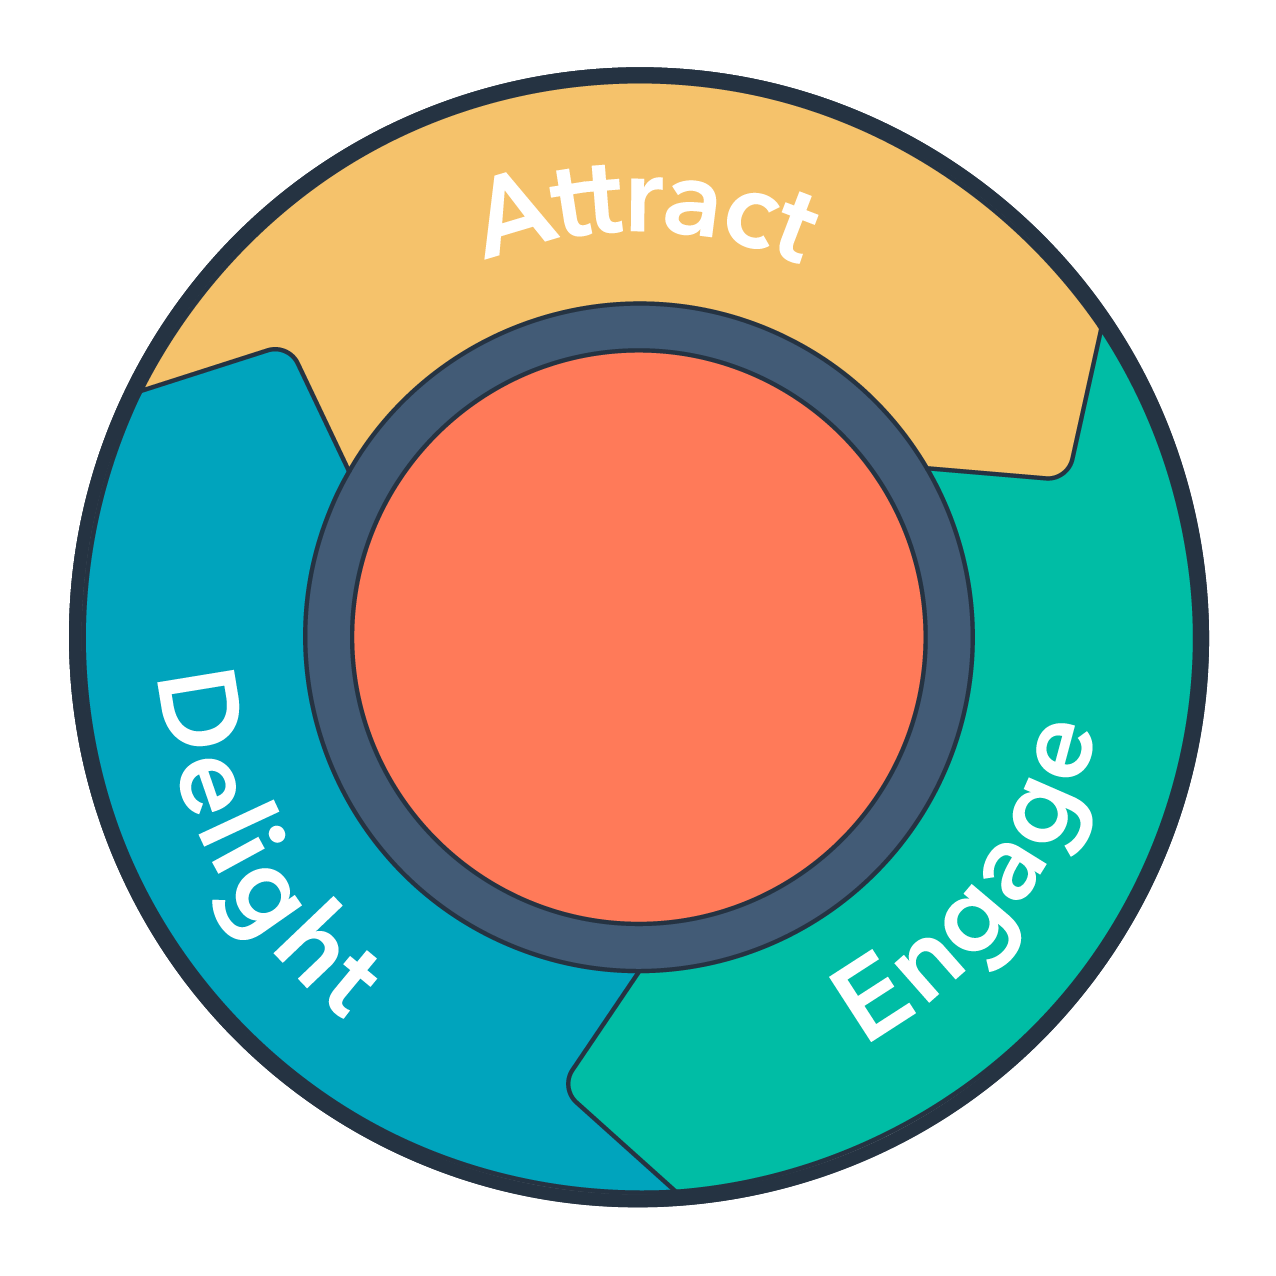 Inbound promotional flywheel to attract, engage, including satisfy customers